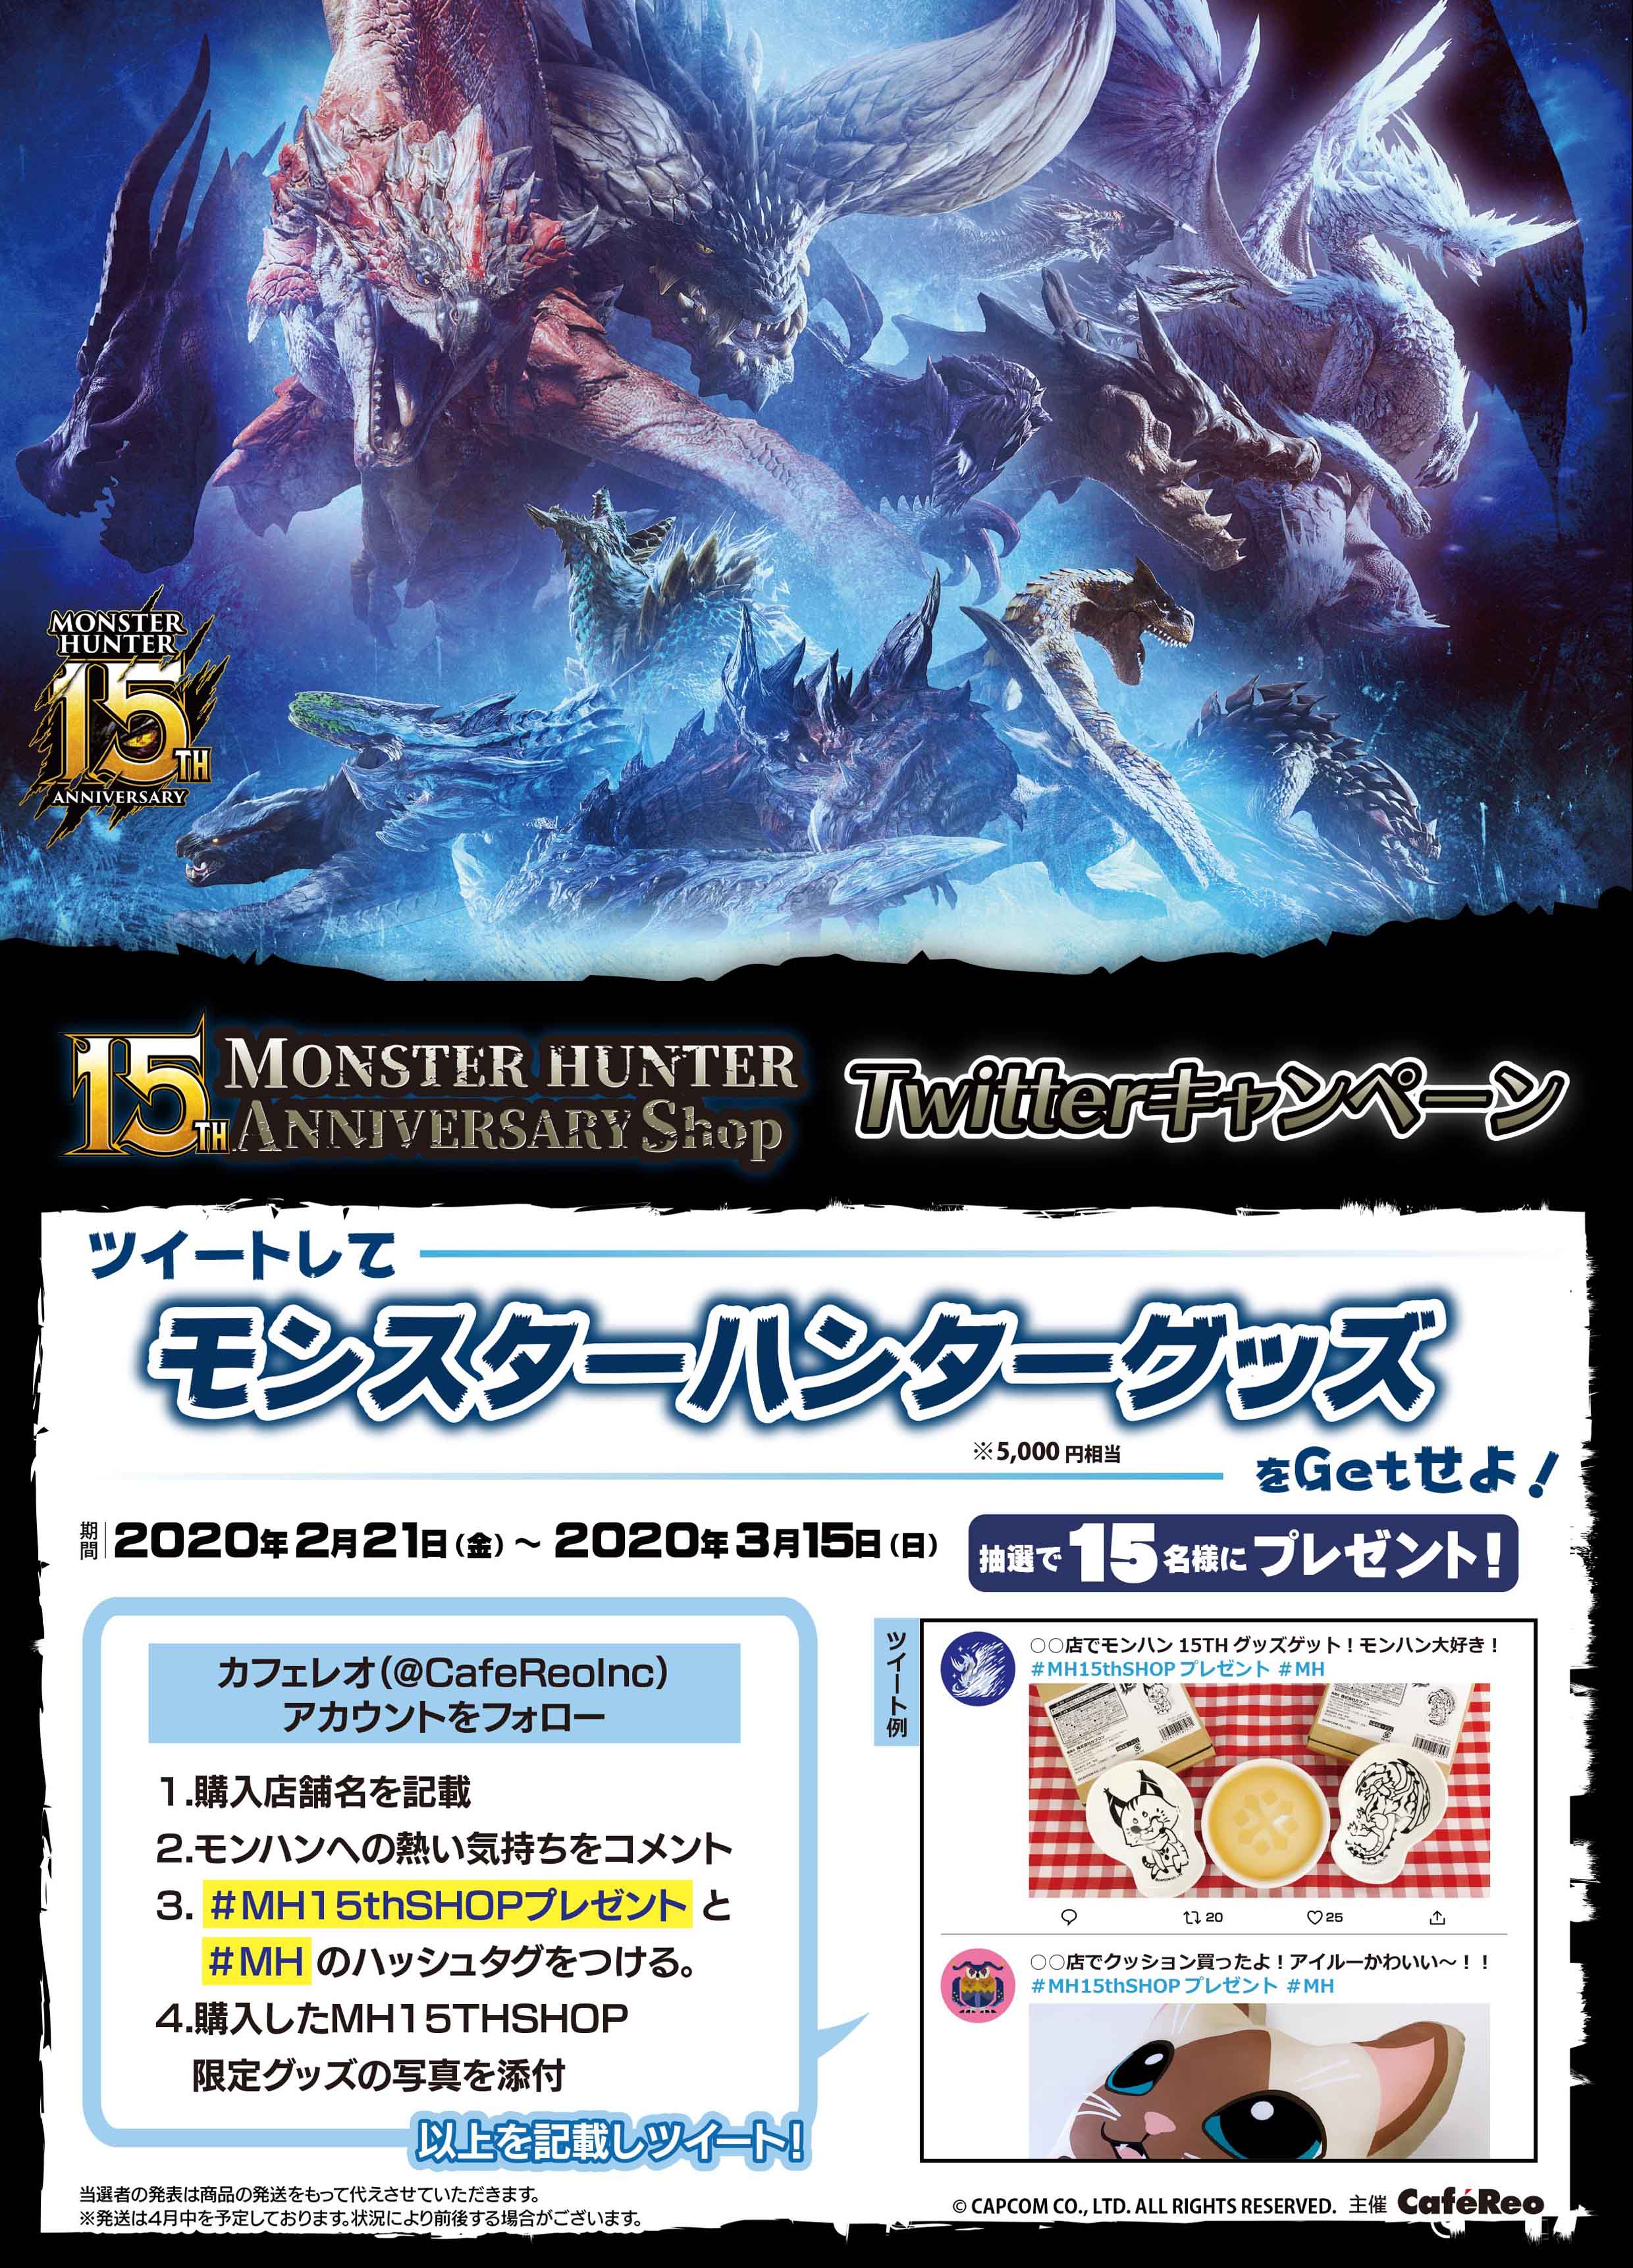 Monster Hunter 15th Anniversary Shop Cafereo